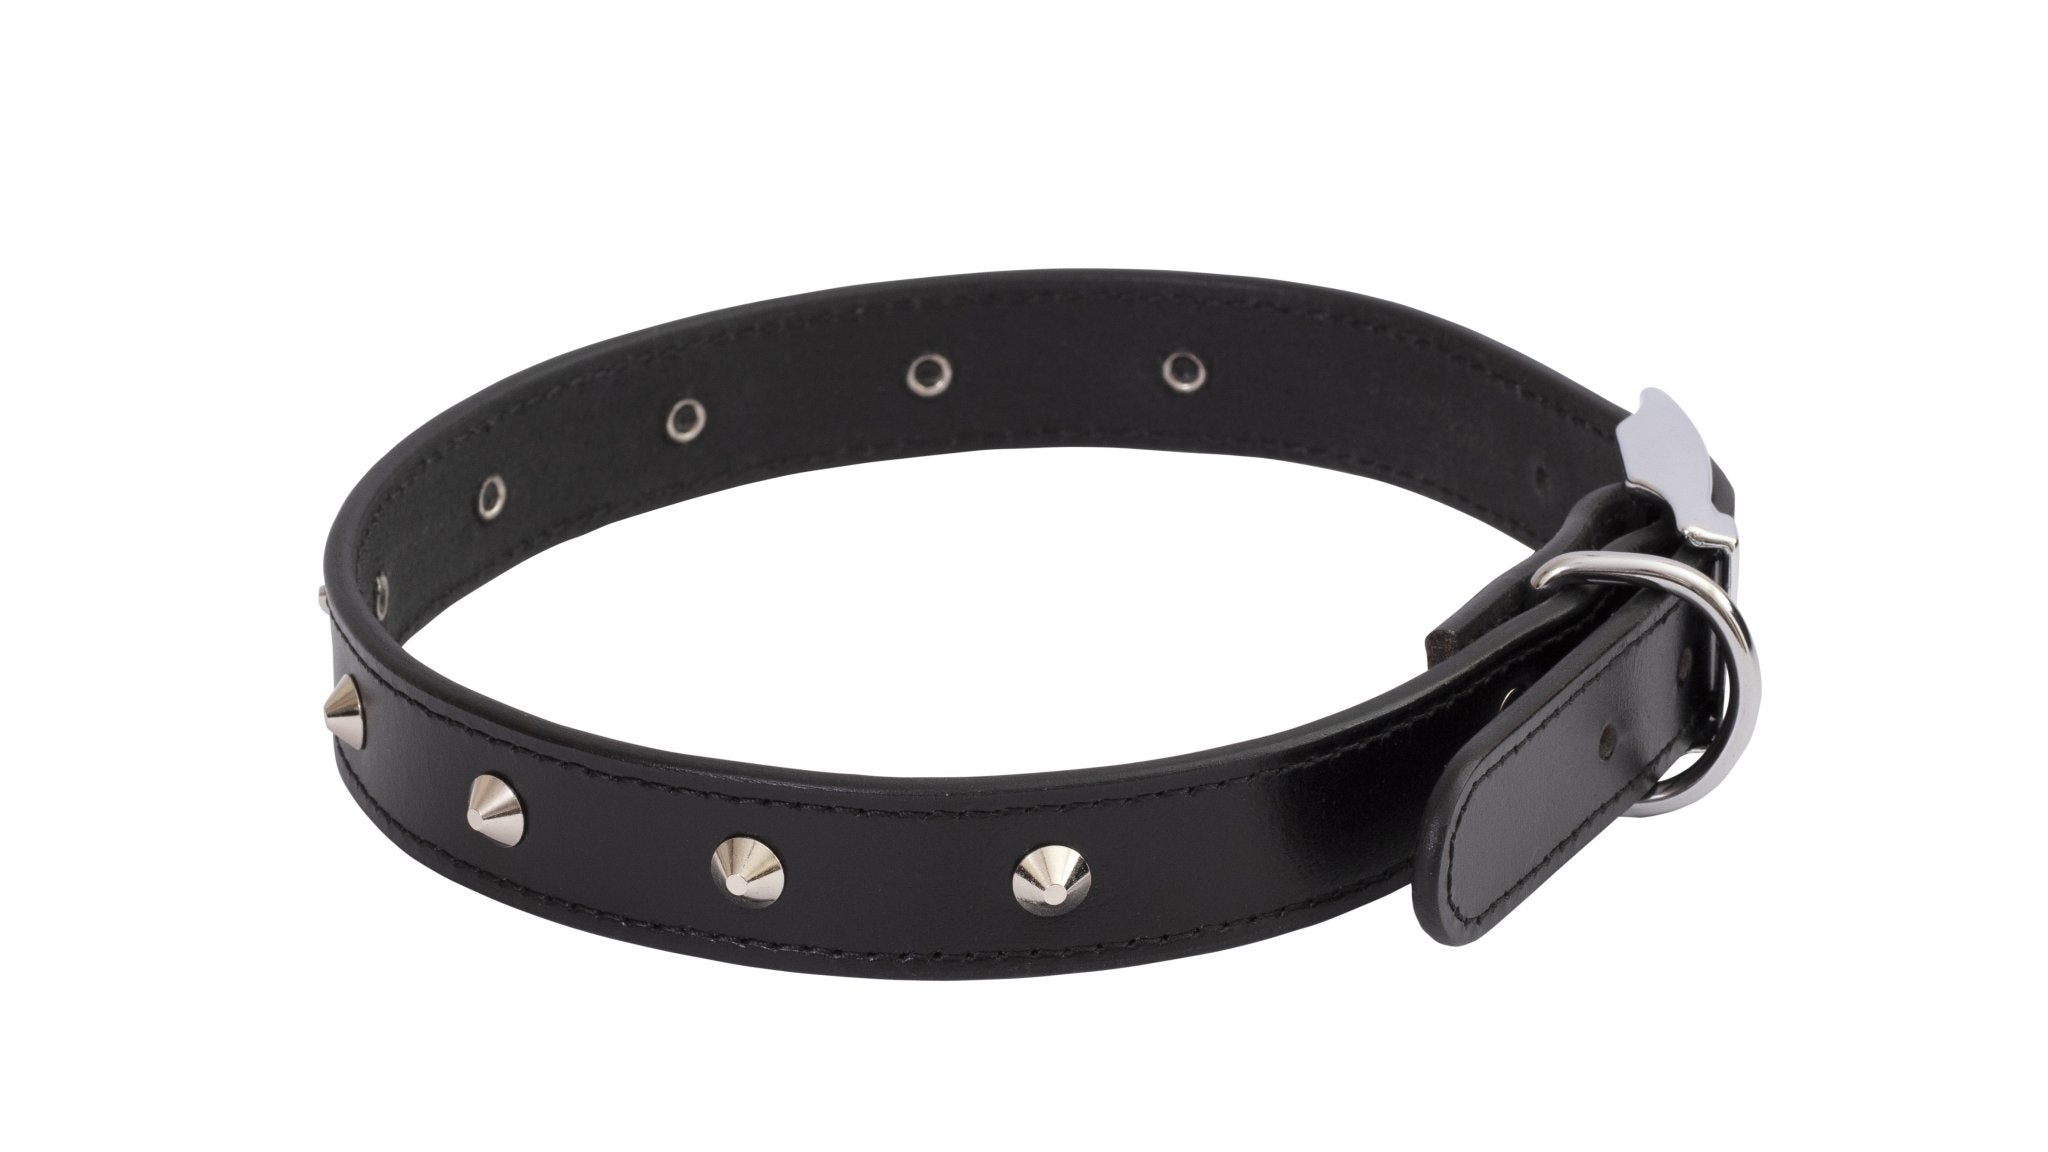 Beau Pets Leather Deluxe Sewn Stud Collar